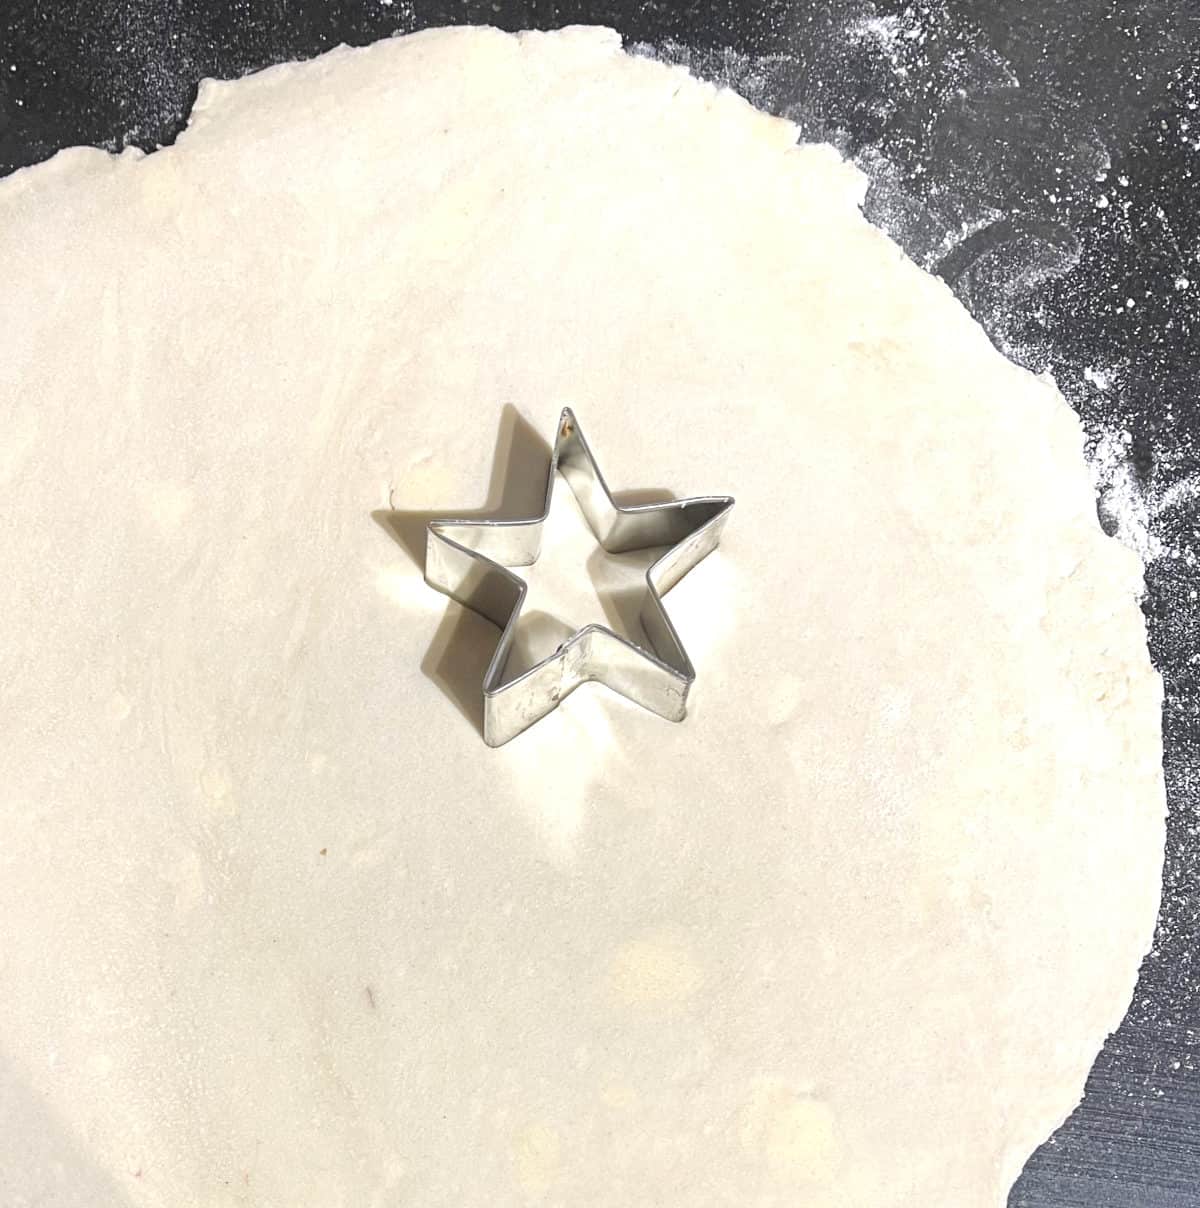 Star cookie cutter on rolled out pie dough.